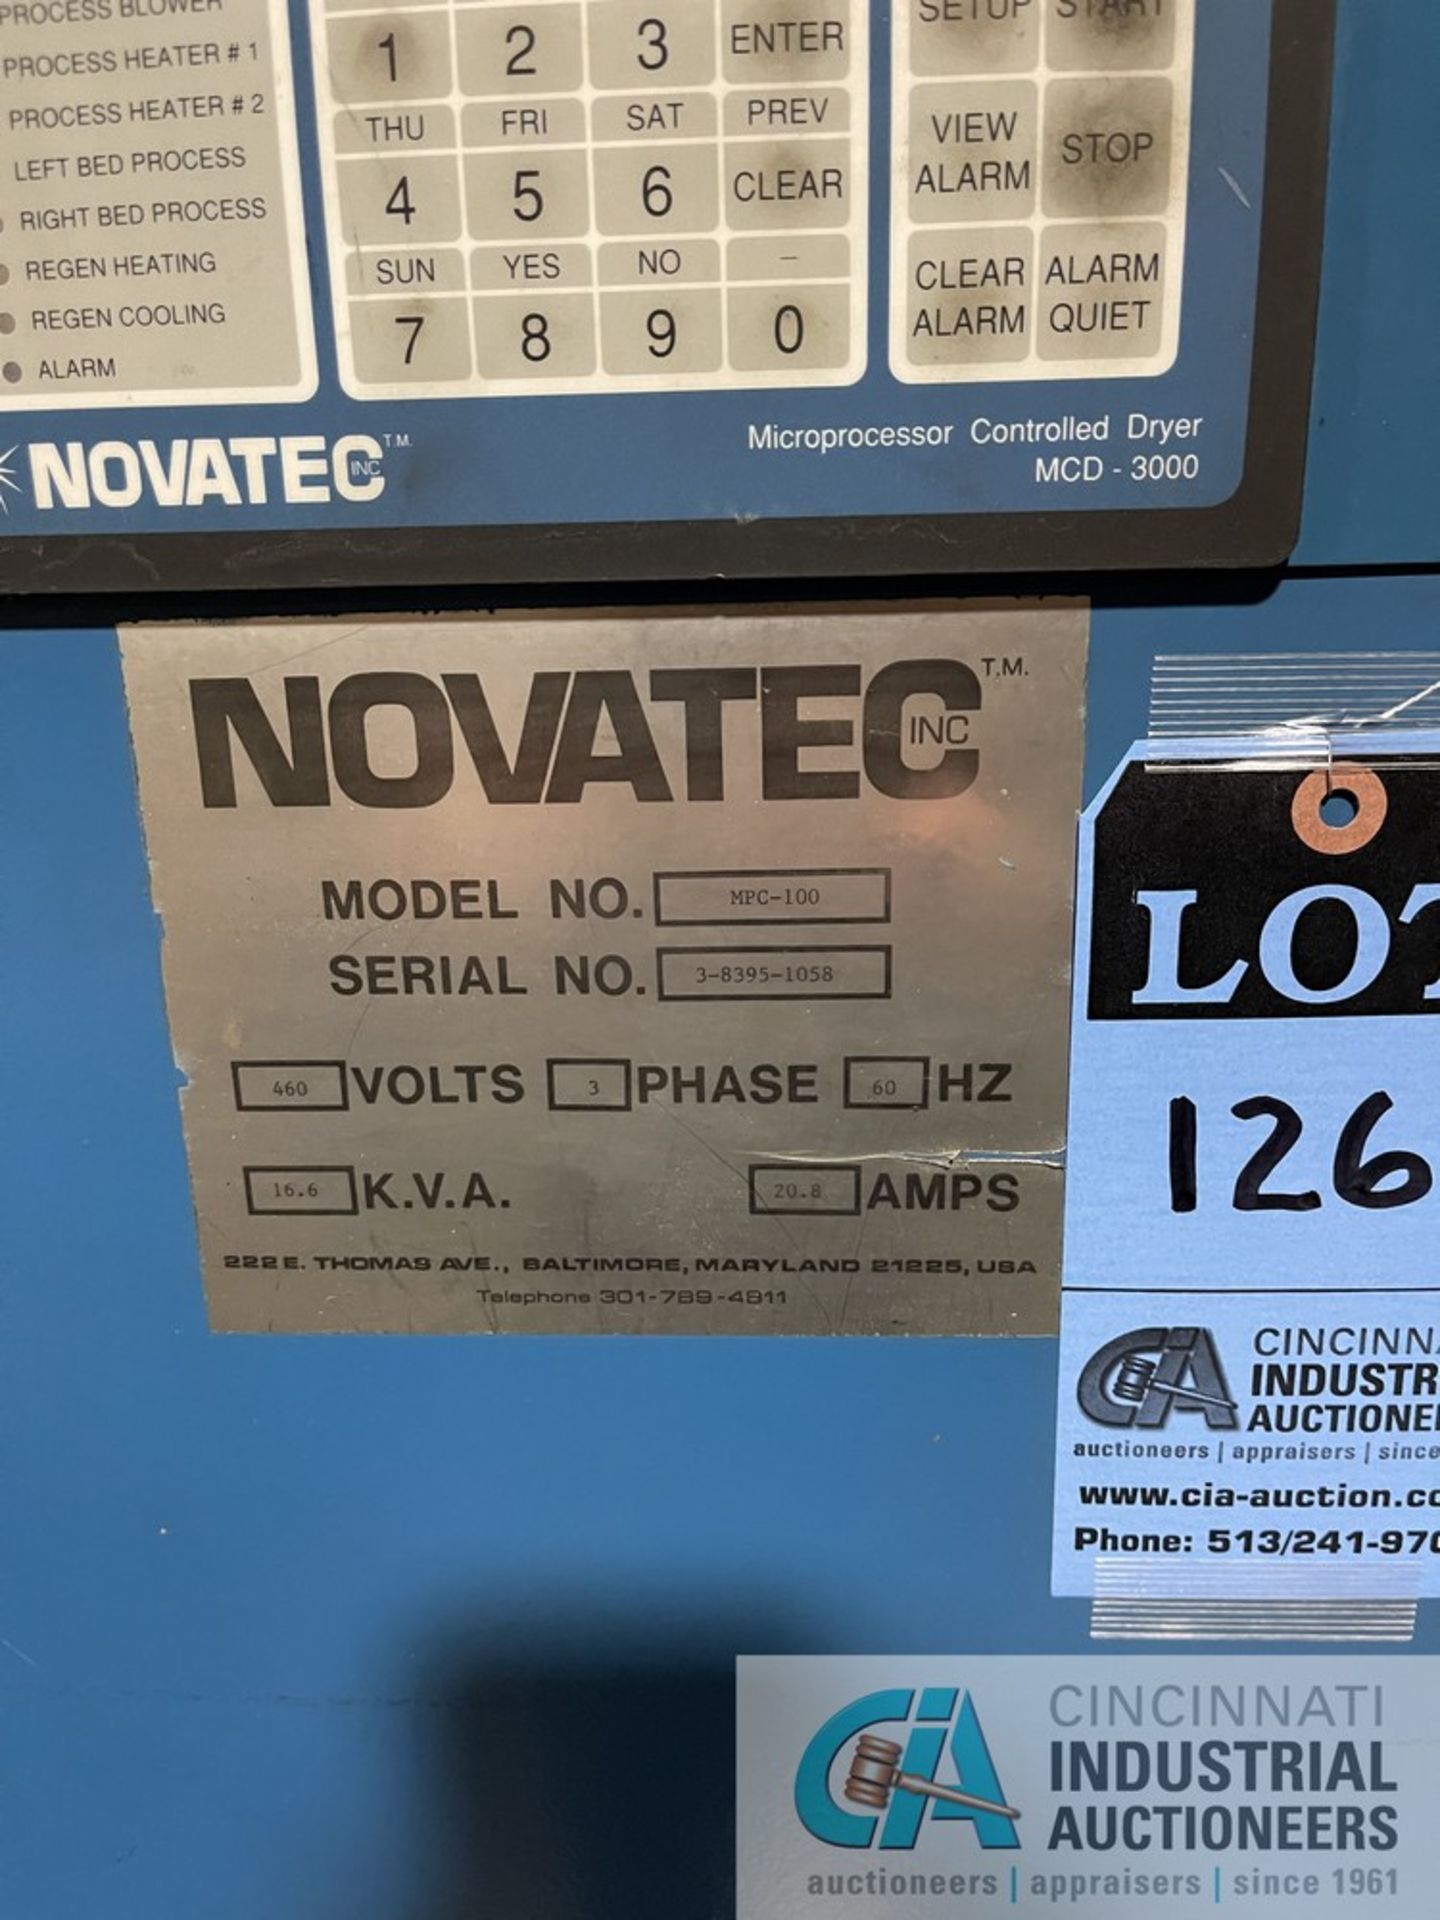 NOVATEC MODEL MPC-100 DESICCANT DRYER; S/N 3-8395-1058, MICROPROCESSOR CONTROL WITH 400 LB. CAPACITY - Image 3 of 5